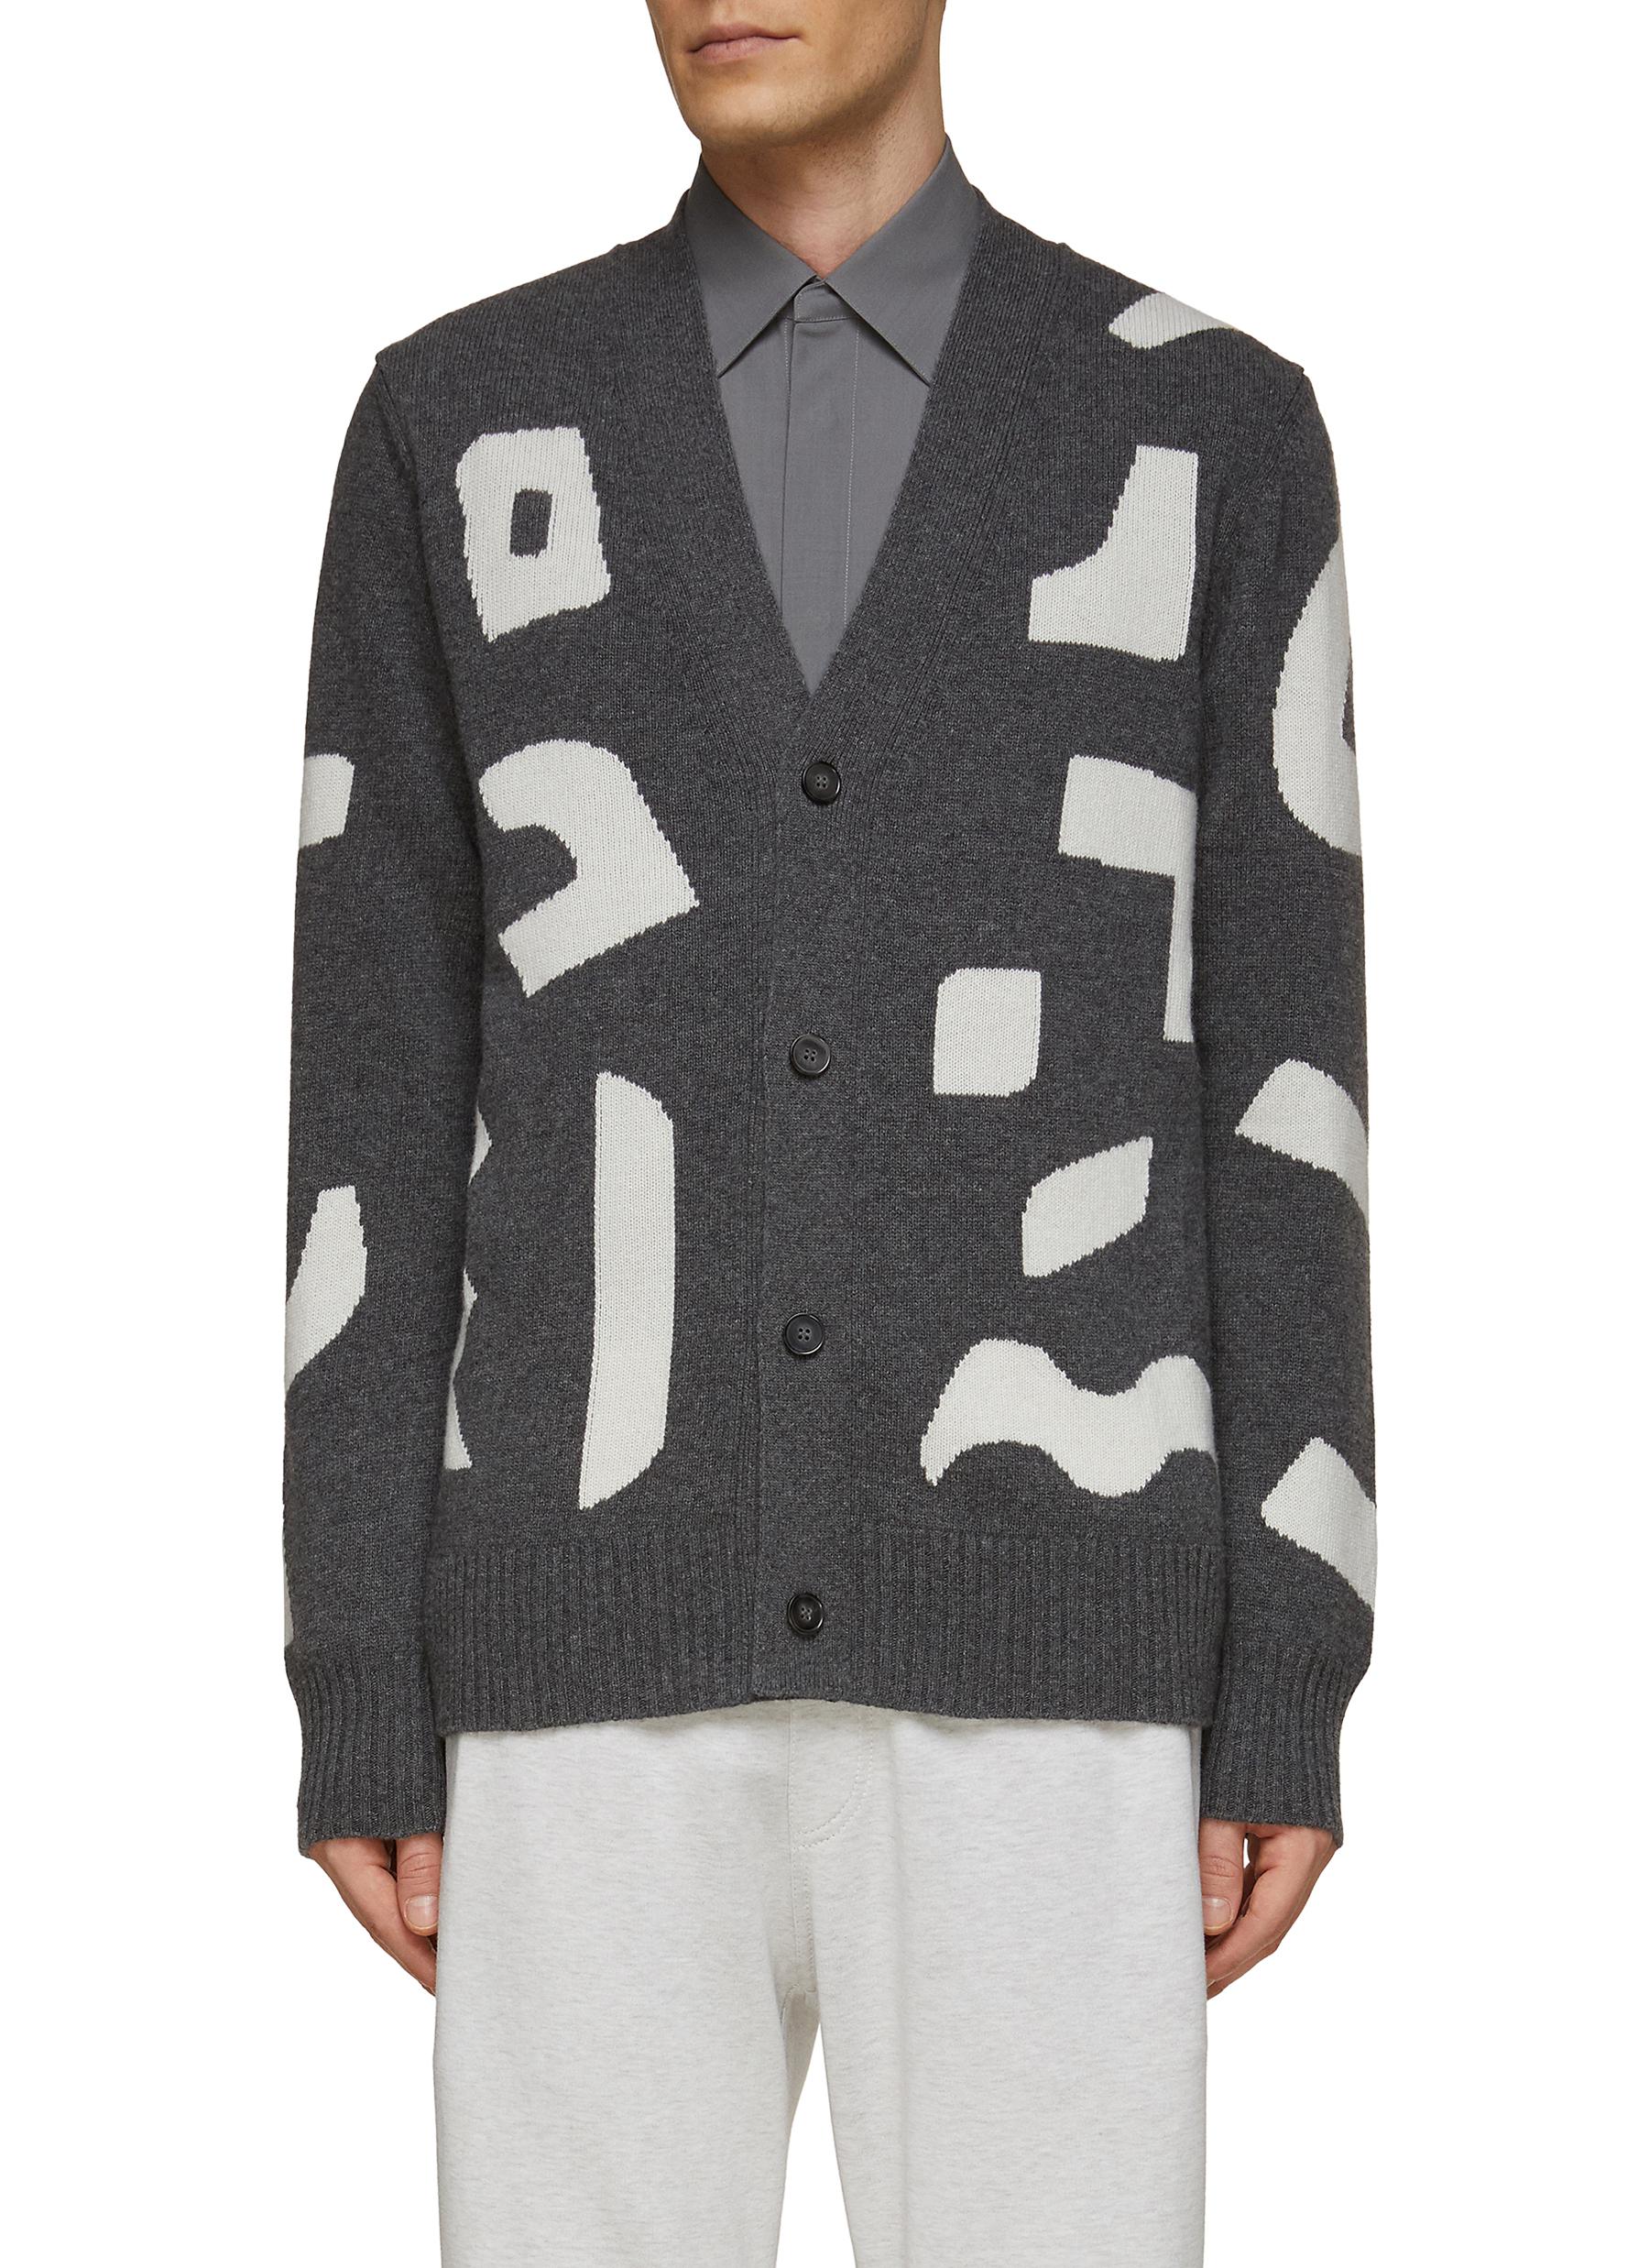 OFFICINE GÉNÉRALE 'Miles' Abstract Intarsia Loose Cashmere-Wool Blend Cardigan